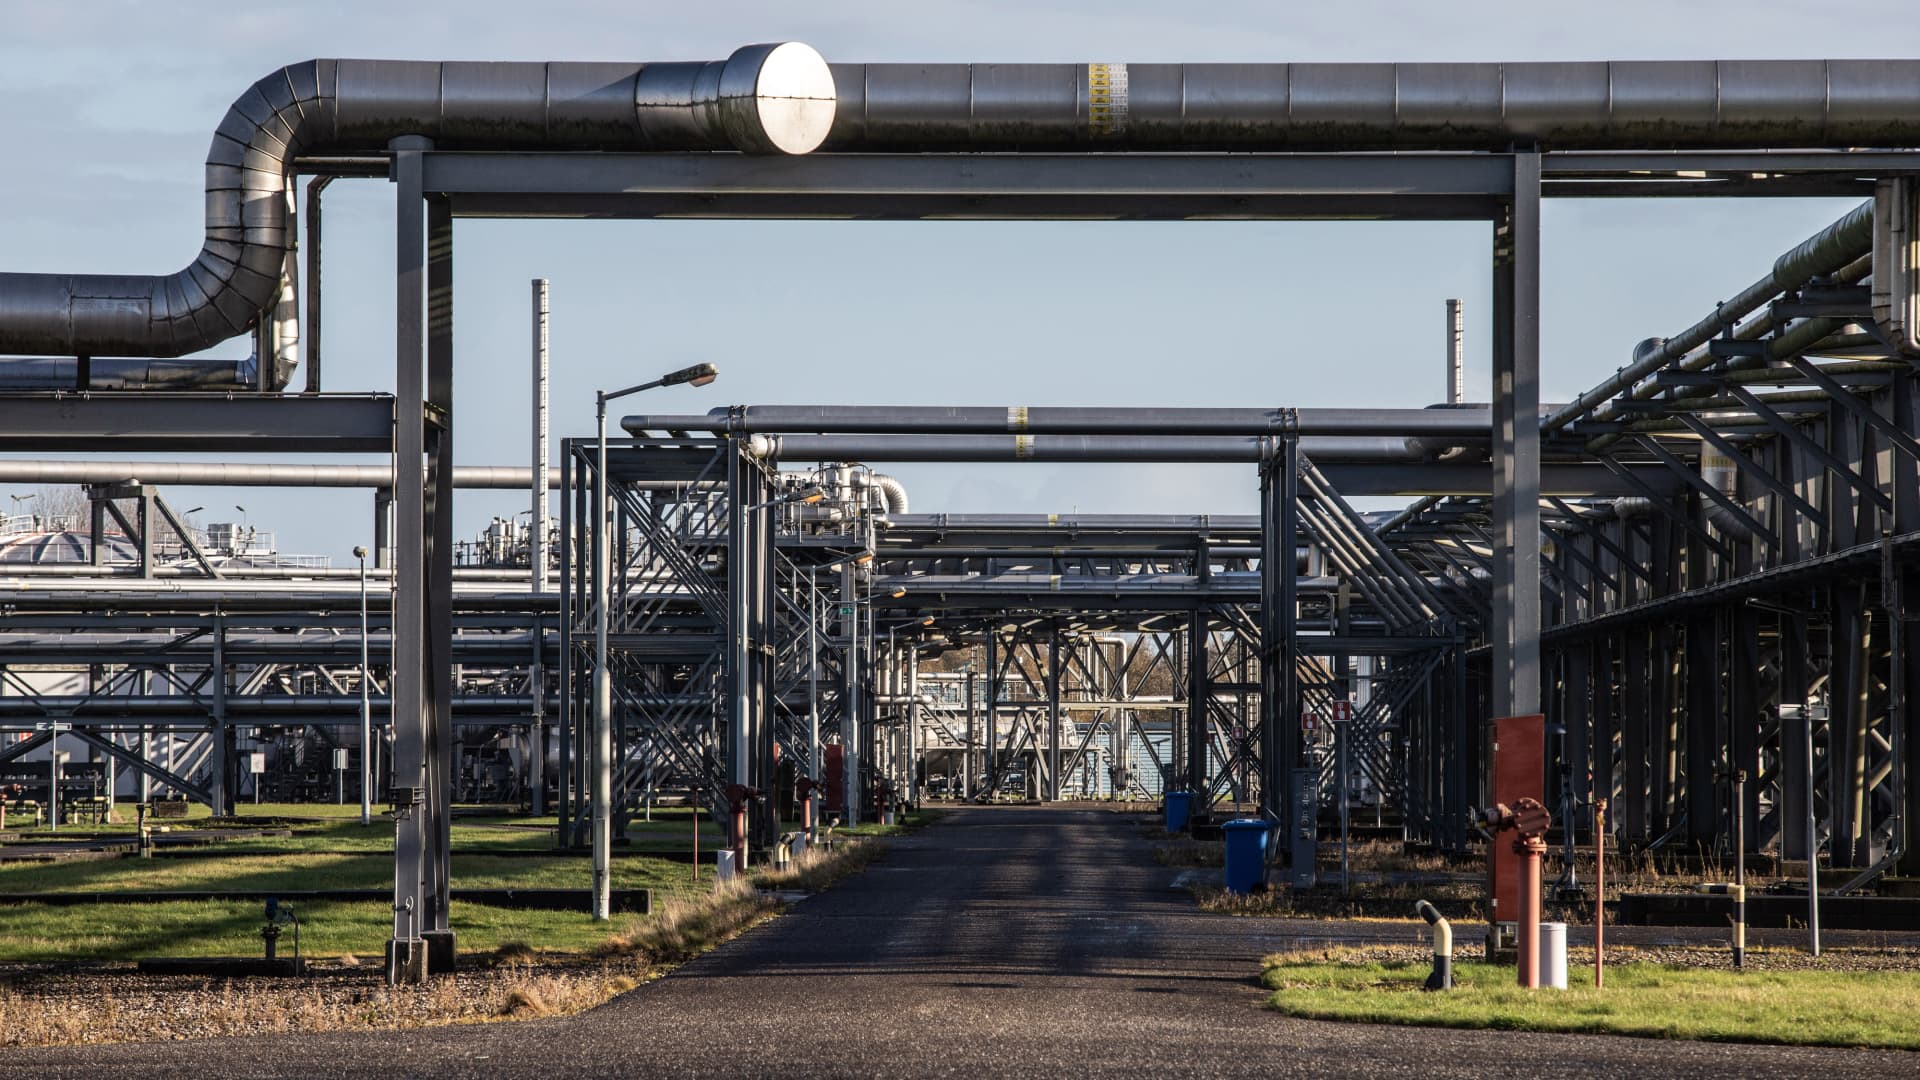 Pipework at a natural gas condensate storage and distribution site in Grijpskerk, Netherlands, on Wednesday, Nov. 17, 2021.